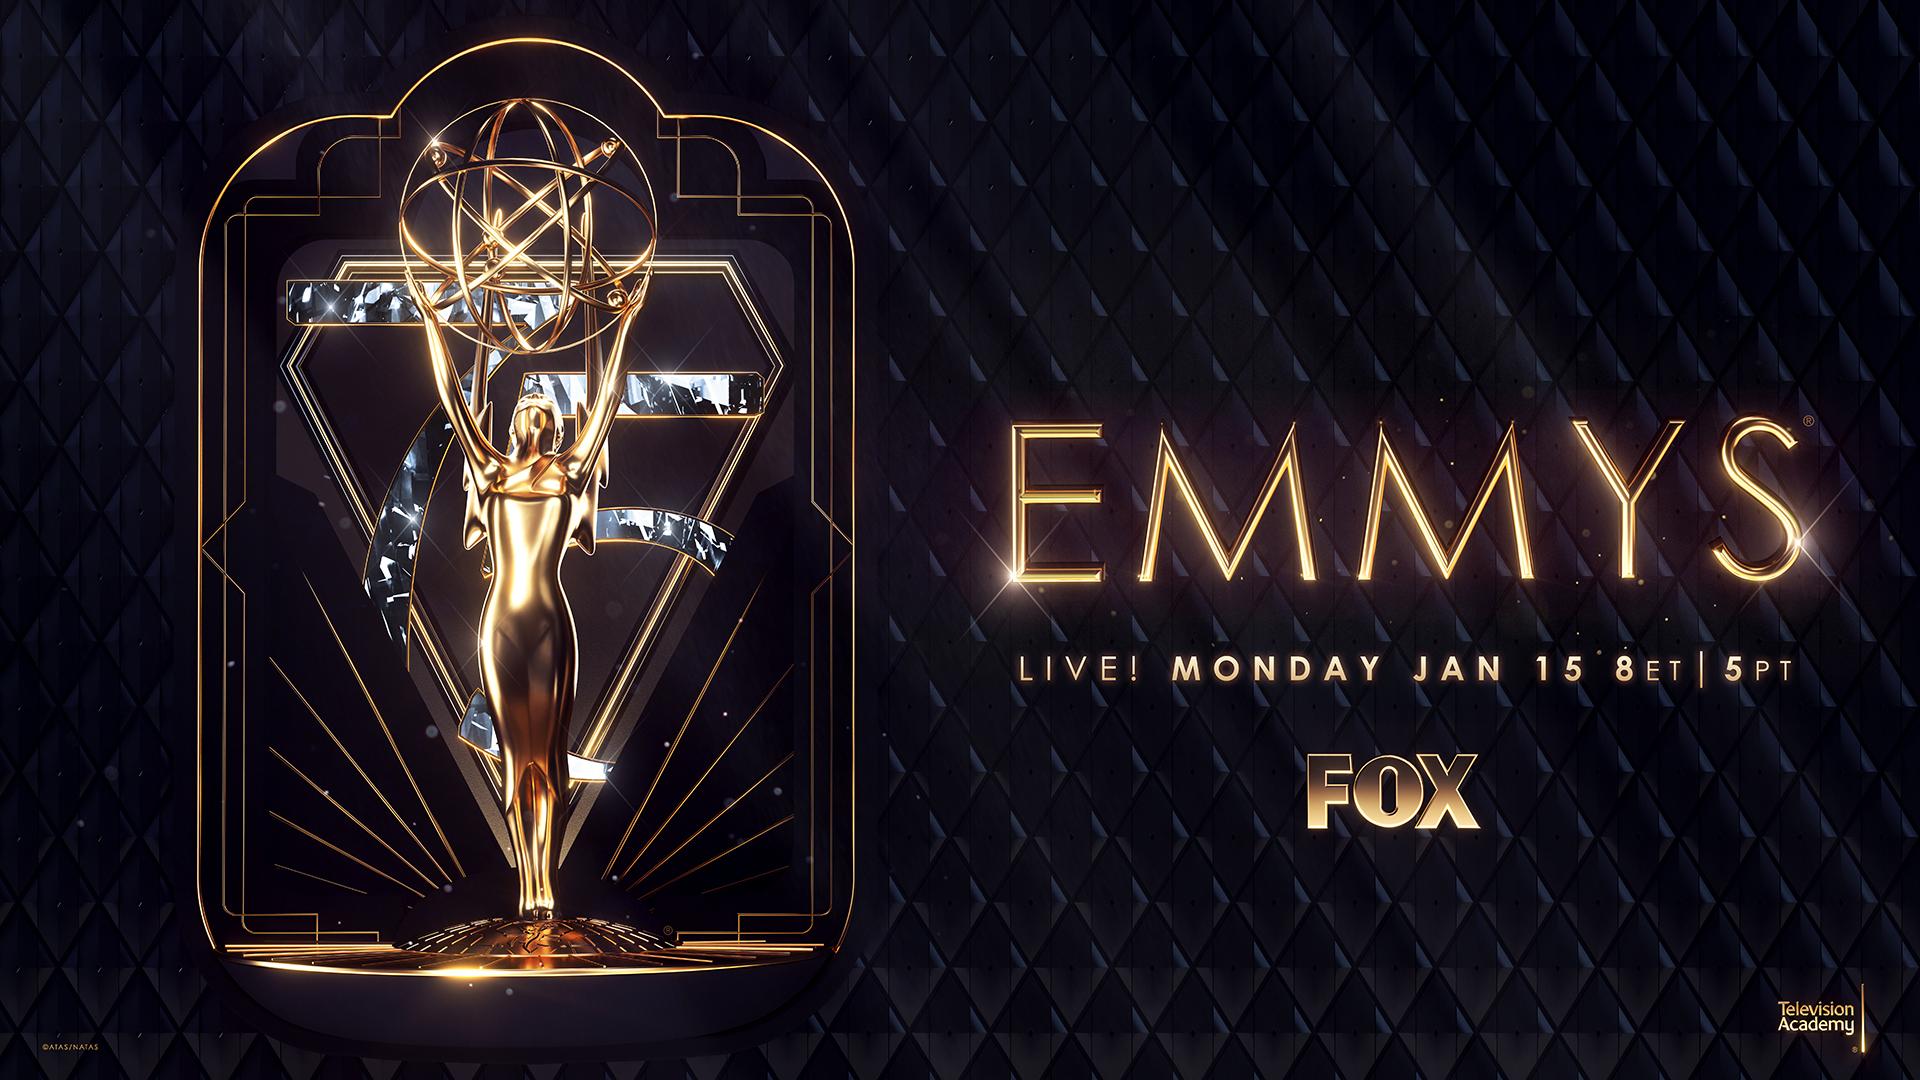 The 75th Primetime Emmy Awards honored the best in American prime time television programming from June 1, 2022, until May 31, 2023, as chosen by the Academy of Television Arts & Sciences. The ceremony was broadcast on Fox on January 15, 2024, with the 75th Primetime Creative Arts Emmy Awards on January 6 and 7 at the Peacock Theater in Downtown Los Angeles, California, following a delay from September 2023 due to the 2023 Hollywood labor disputes. A total of 26 Emmy Awards were presented. The ceremony was produced by Jesse Collins Entertainment and hosted by Anthony Anderson. Nominations were announced on July 12, 2023. Photo Credit: Television Academy